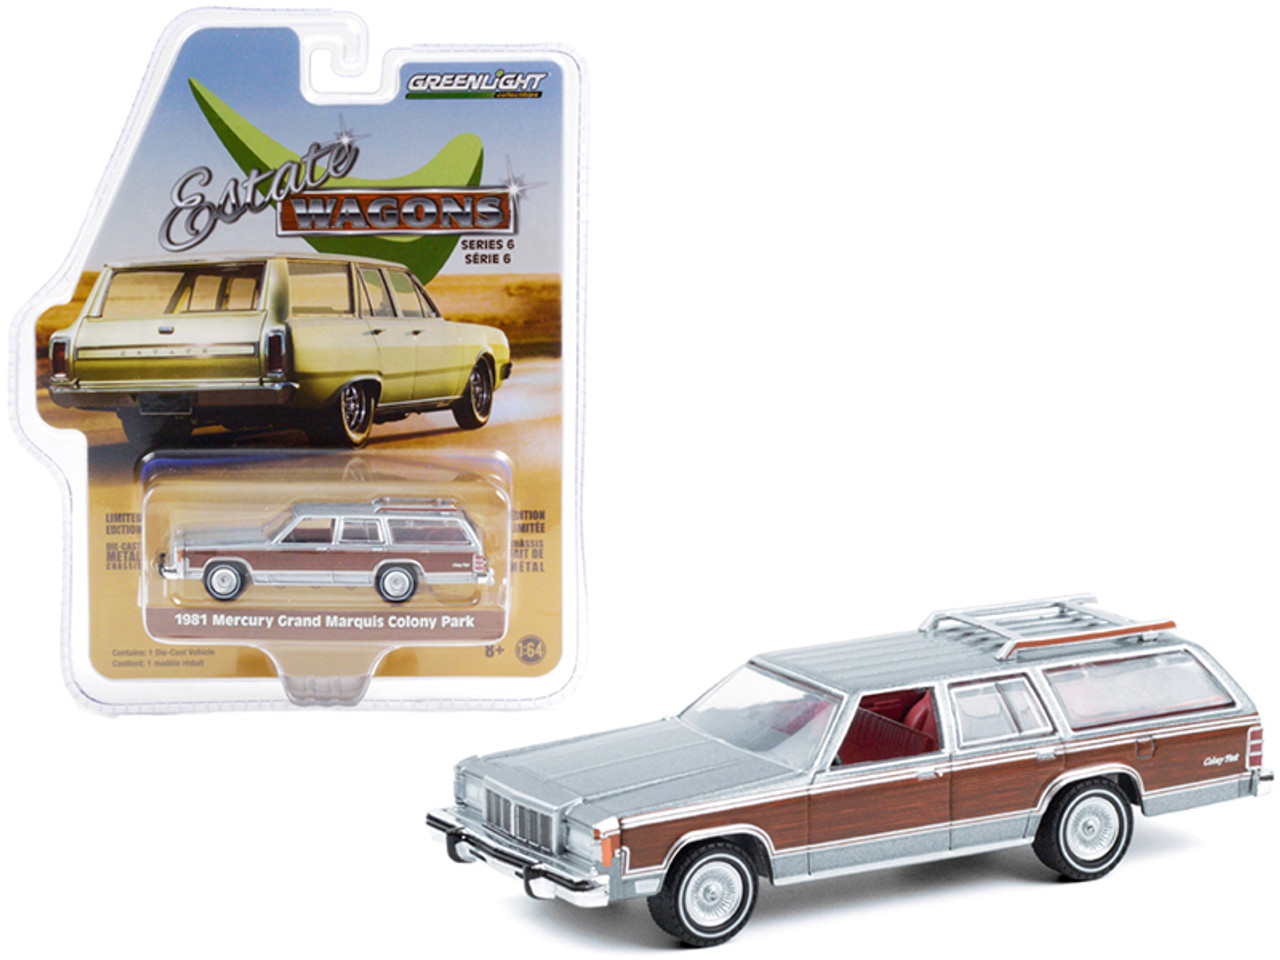 1981 Mercury Grand Marquis Colony Park with Roof Rack Dove Gray Metallic with Woodgrain Sides "Estate Wagons" Series 6 1/64 Diecast Model Car by Greenlight